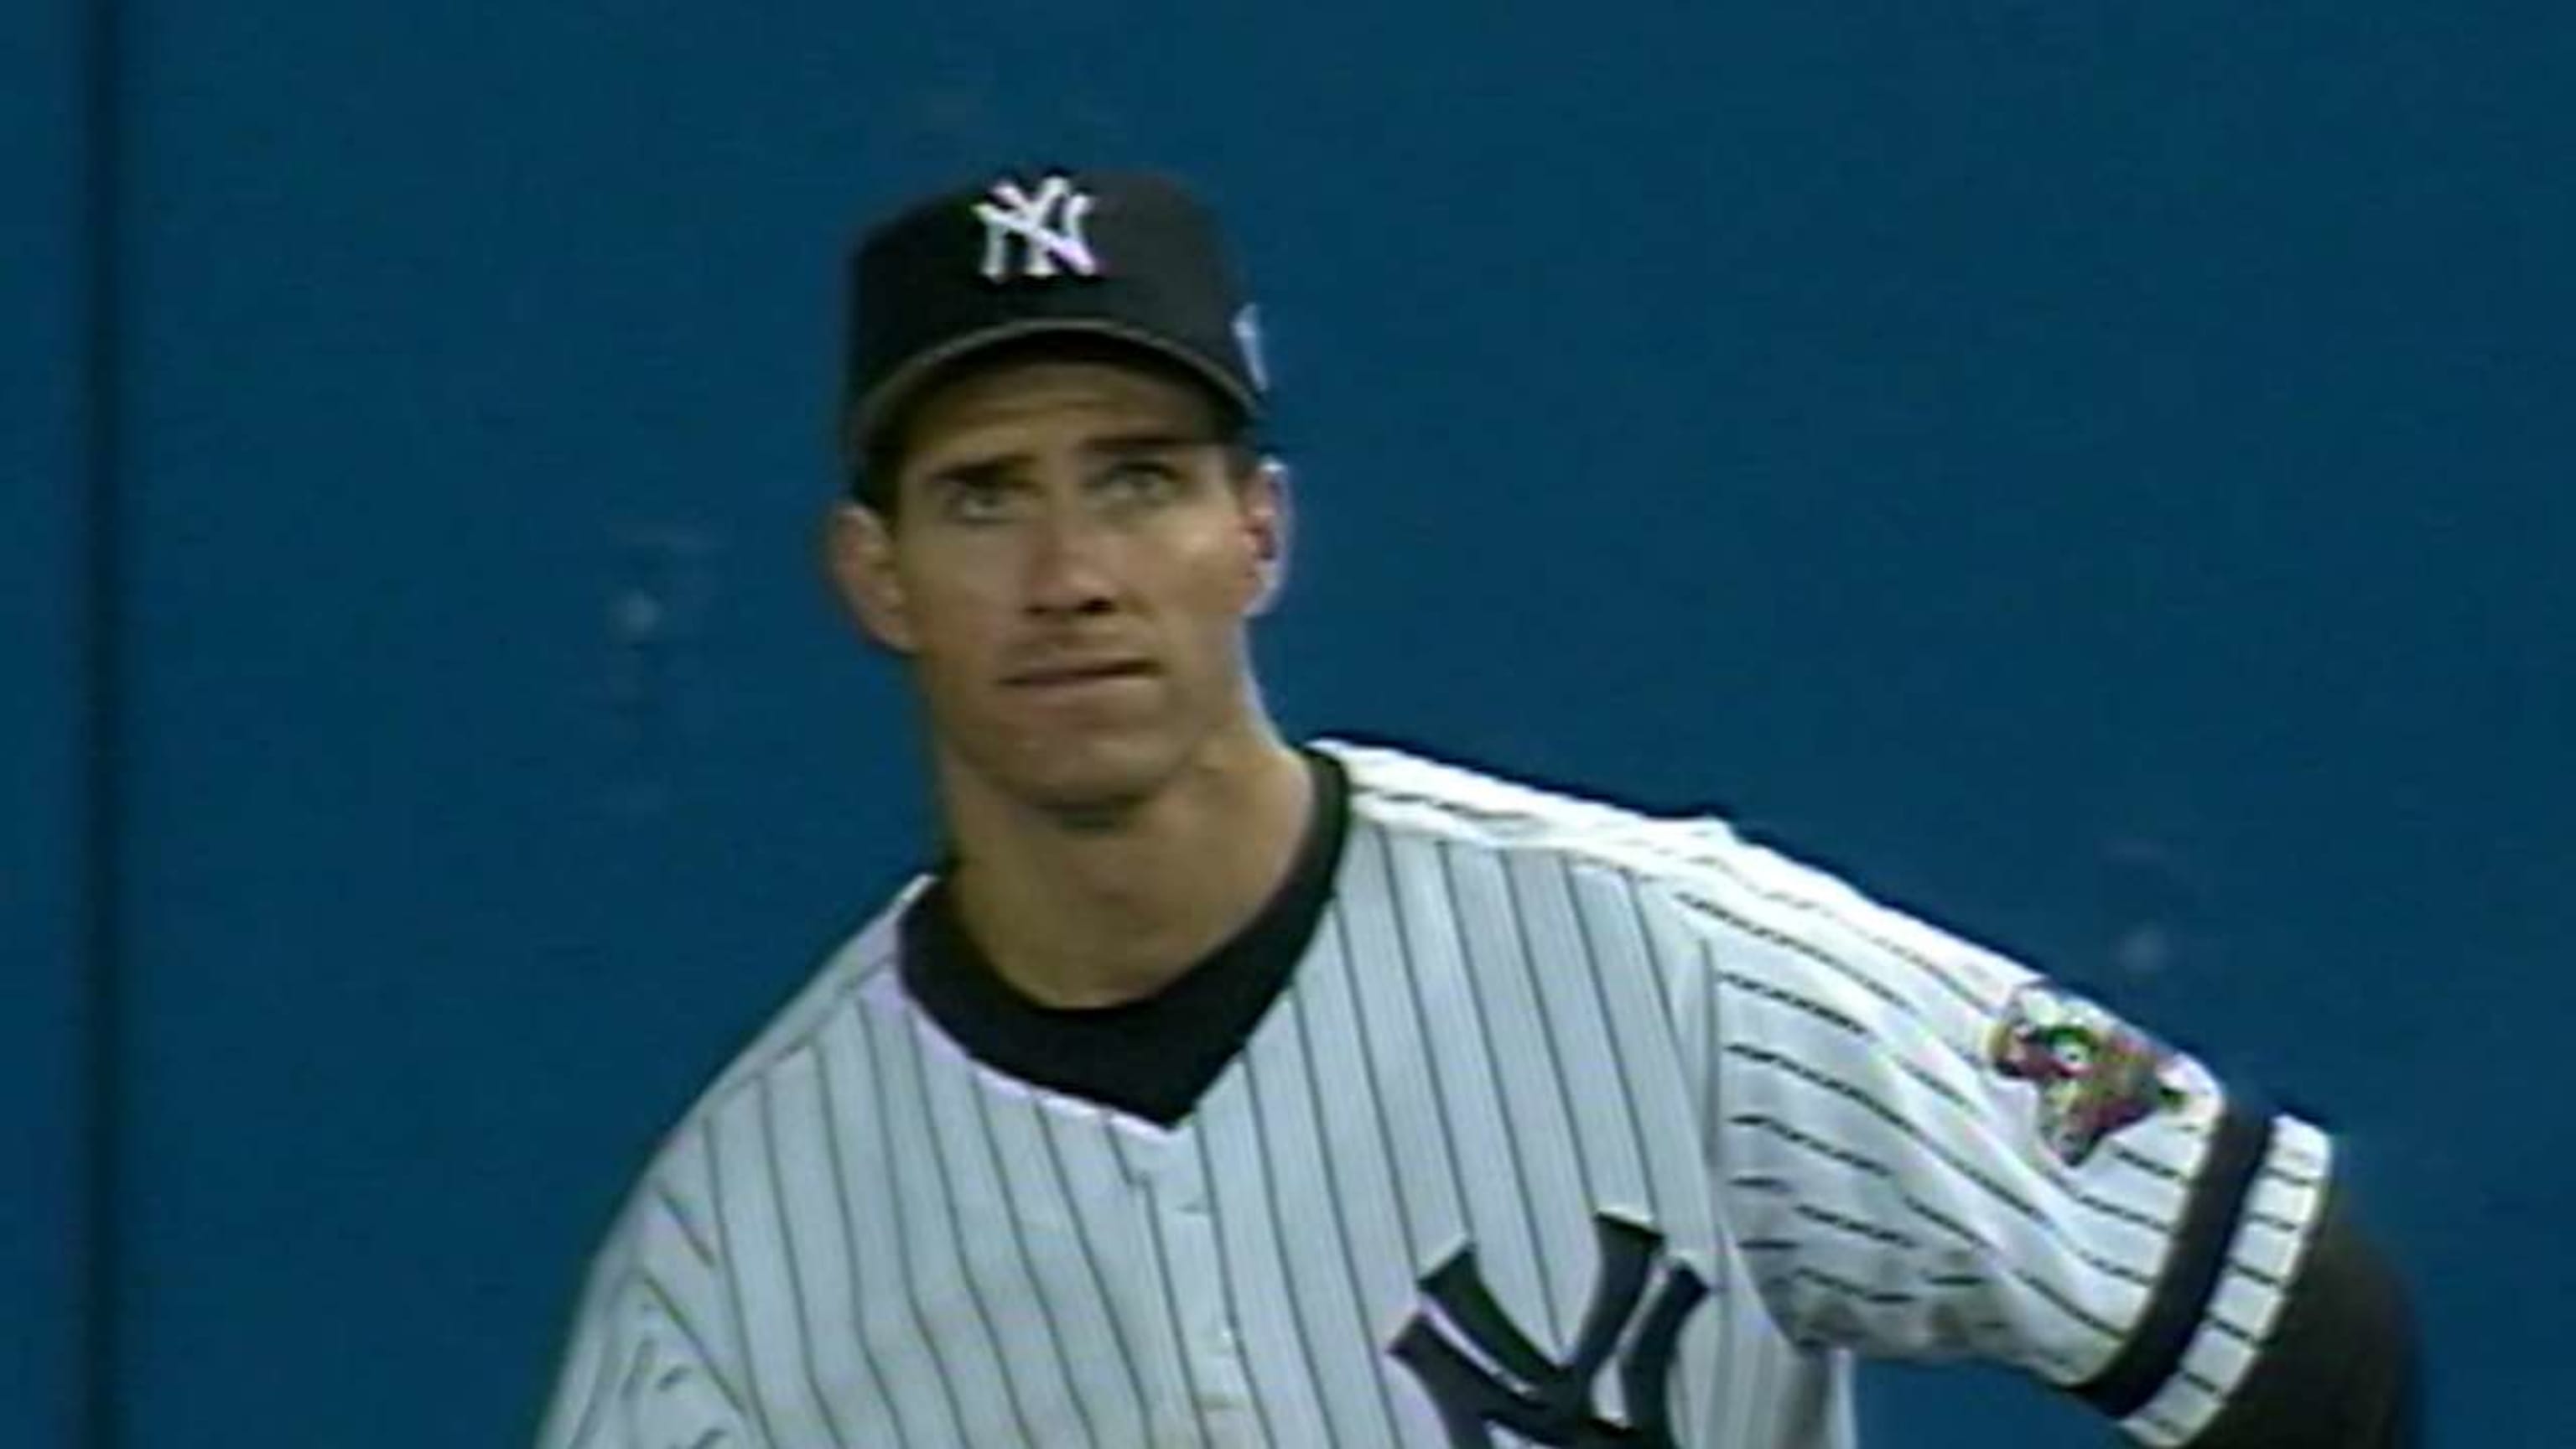 Paul O'Neill discusses number retirement by Yankees